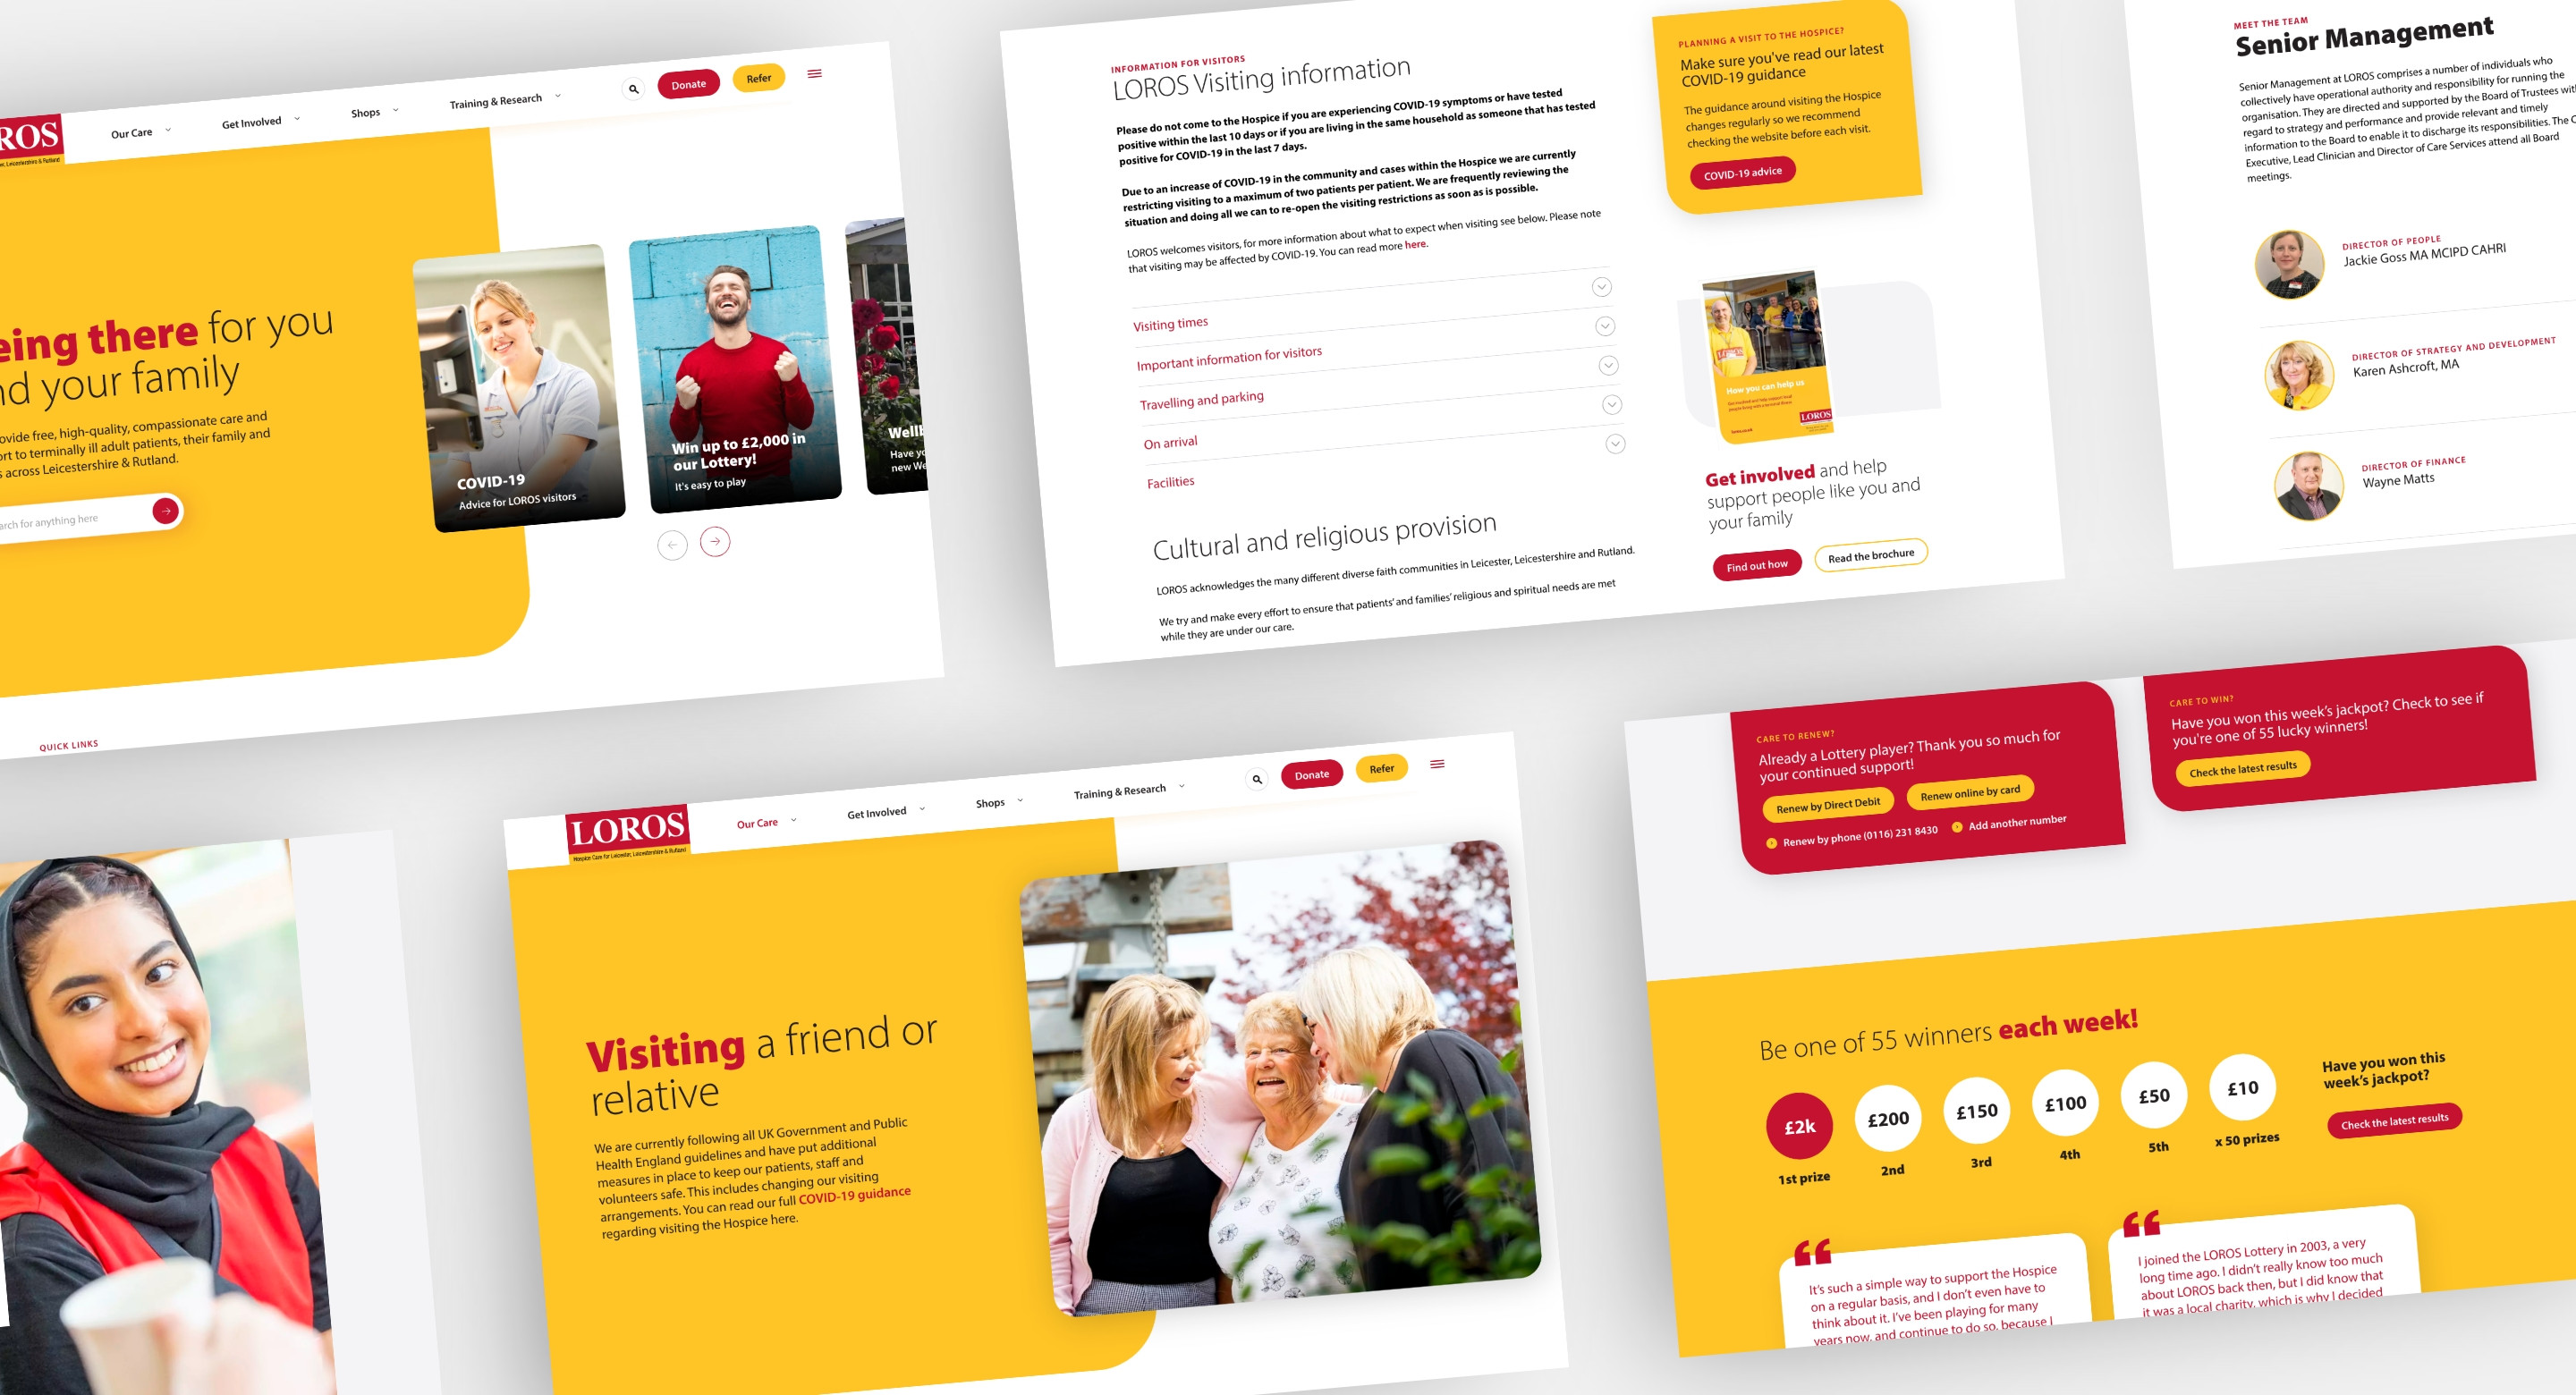 LOROS Hospice charity website design by Root Studio